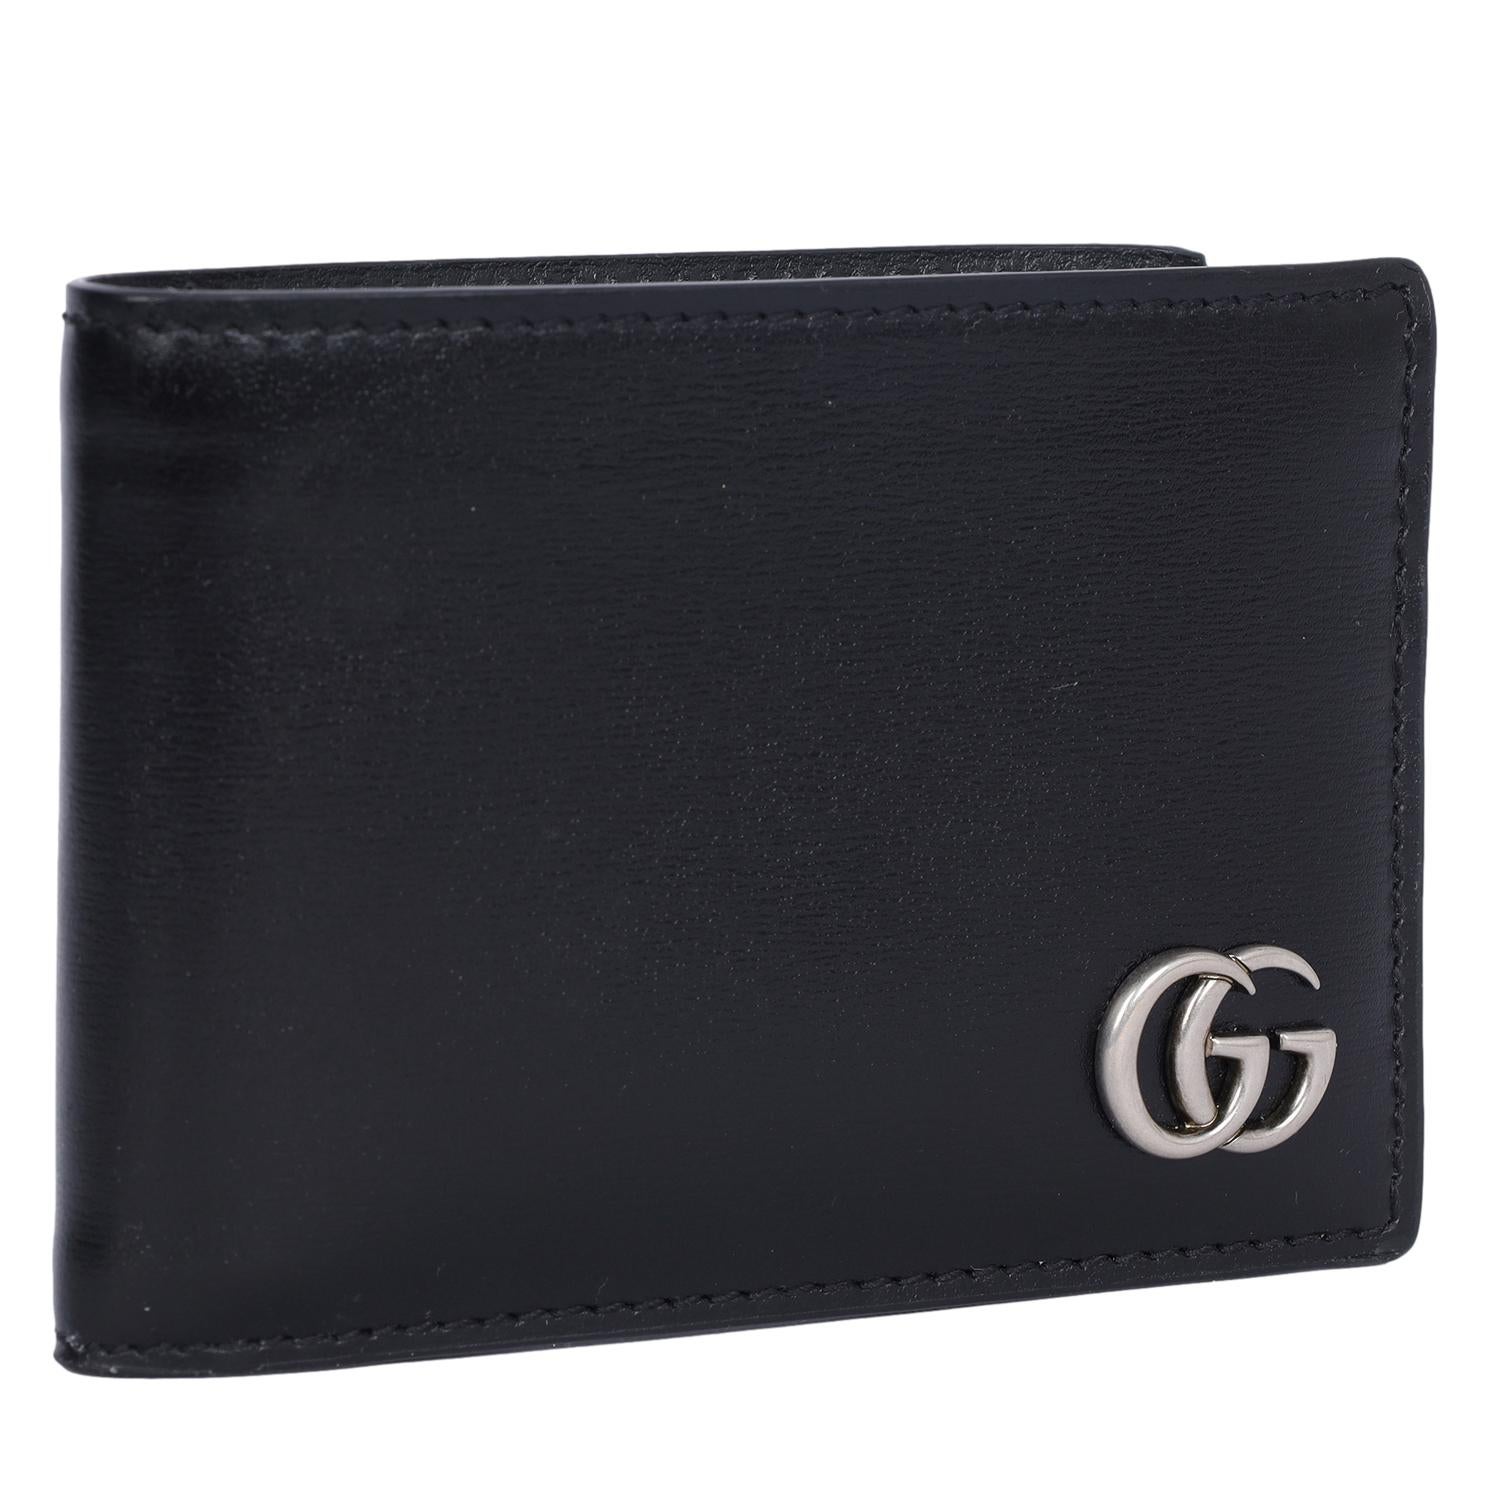 Authentic Gucci GG Marmont Bi-fold Wallet in black leather. 

A slim wallet that features smooth black leather. A Double G palladium toned hardware that adds a subtle logo twist to the wallet. There are 4 card slots and one bill fold